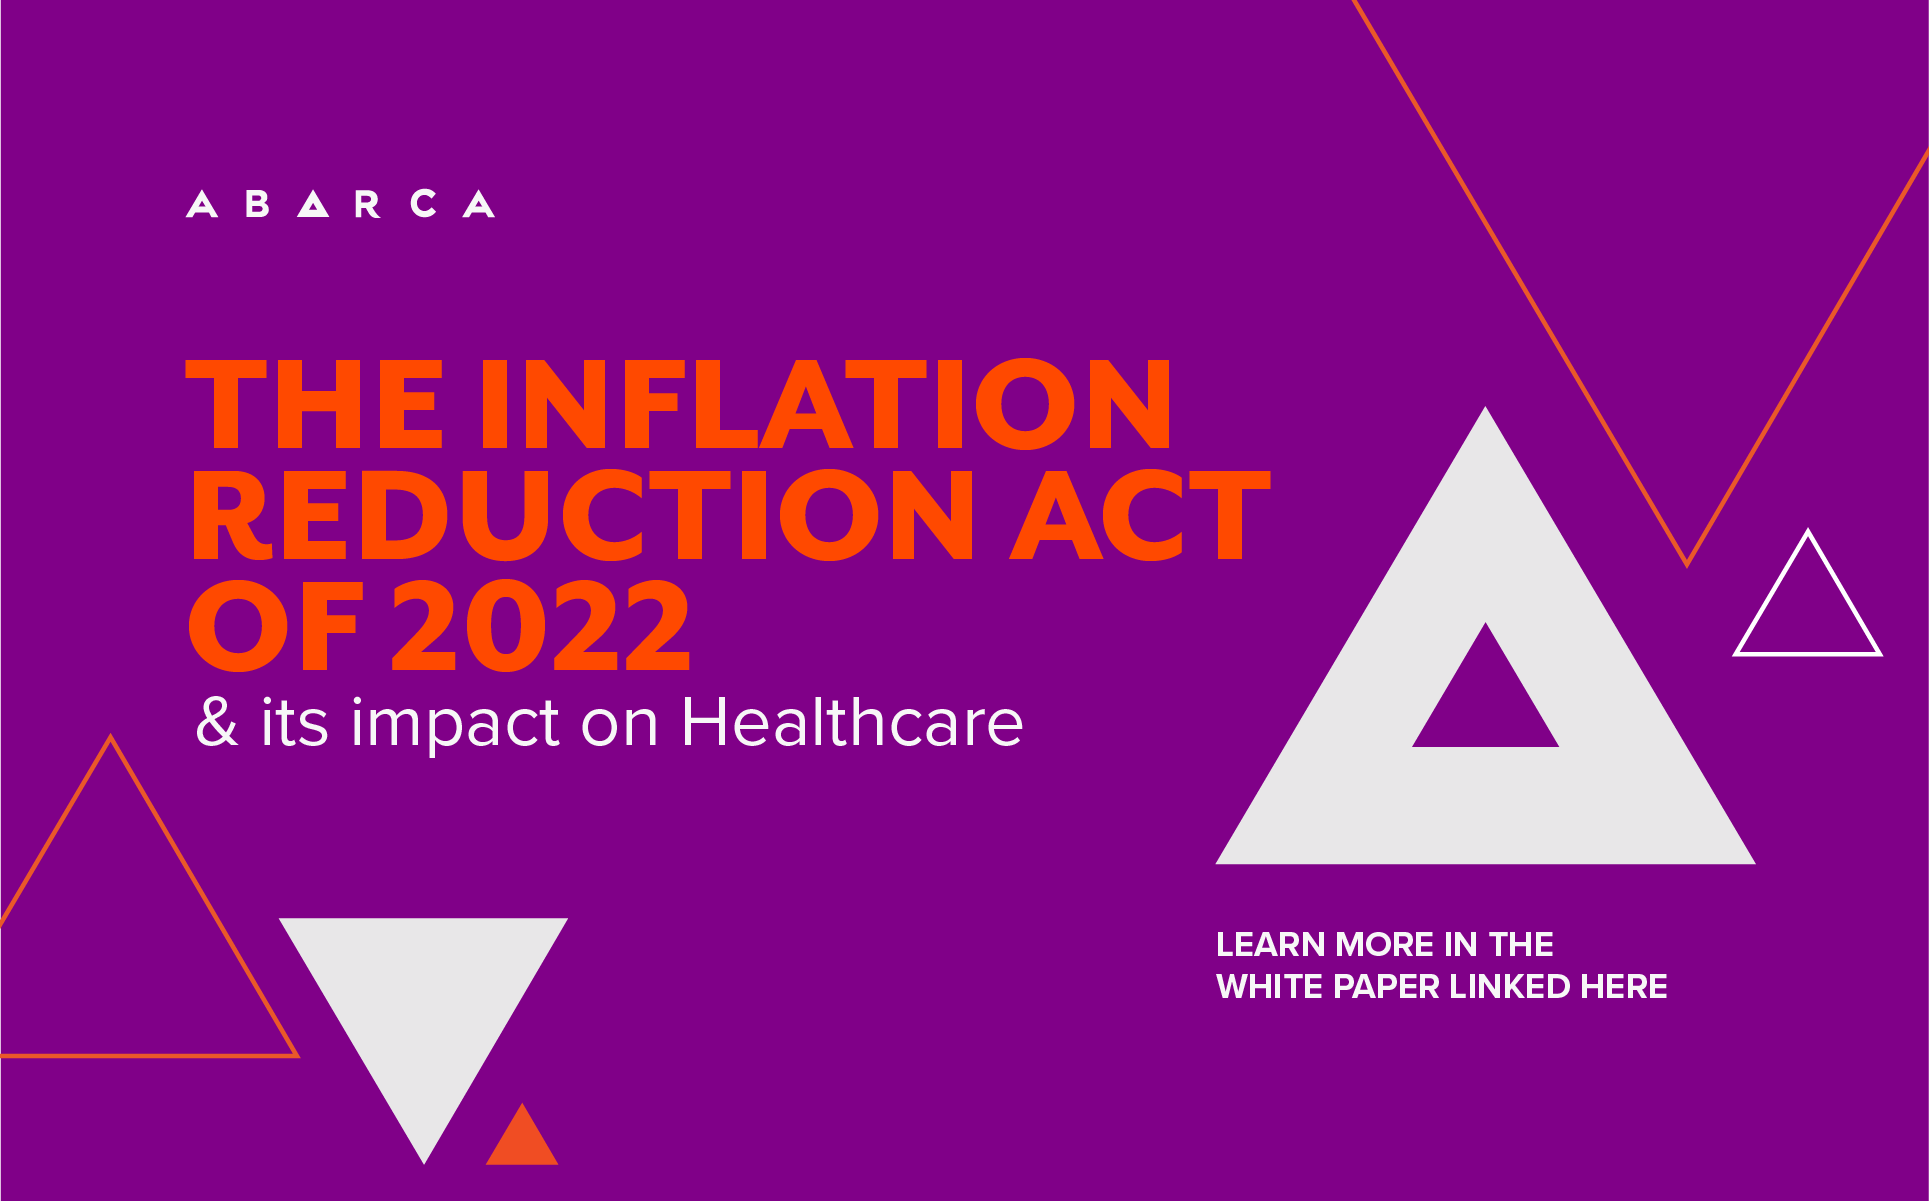 Abarca Health: The Inflation Reduction Act of 2022 and its impact on healthcare